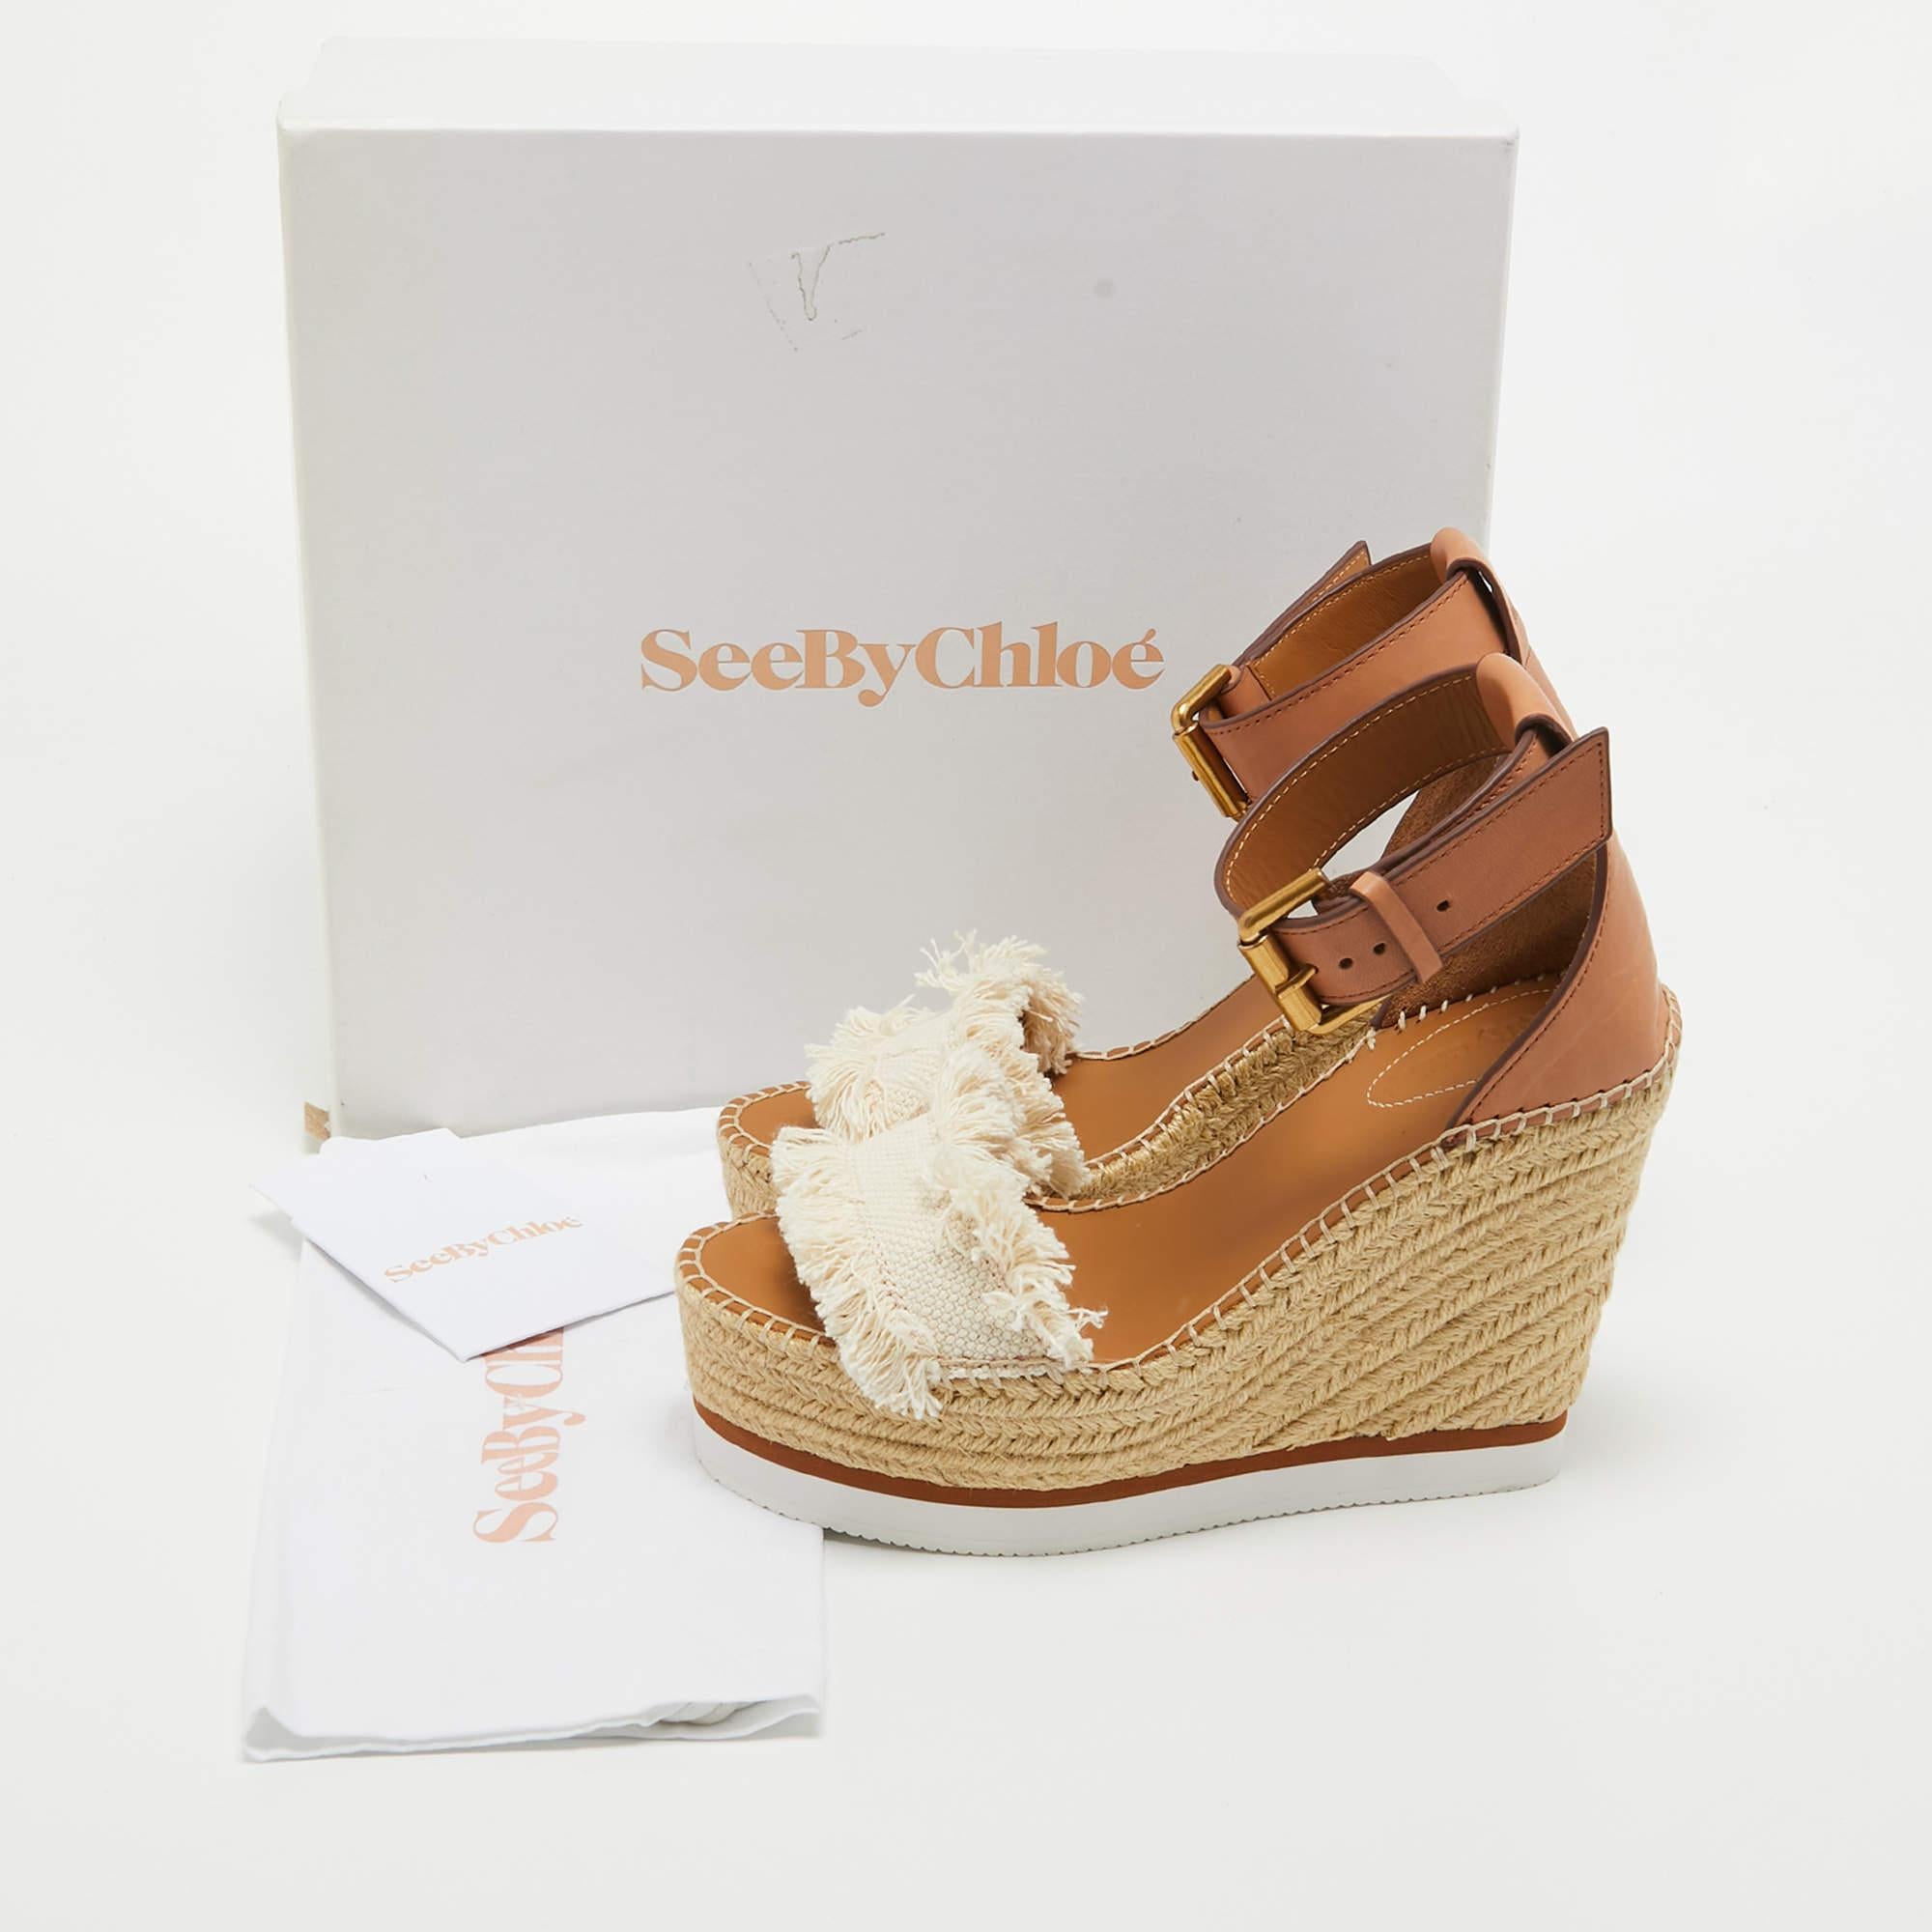 See By Chloe White/Brown Canvas and Leather Espadrille Wedge Sandals Size 36 4